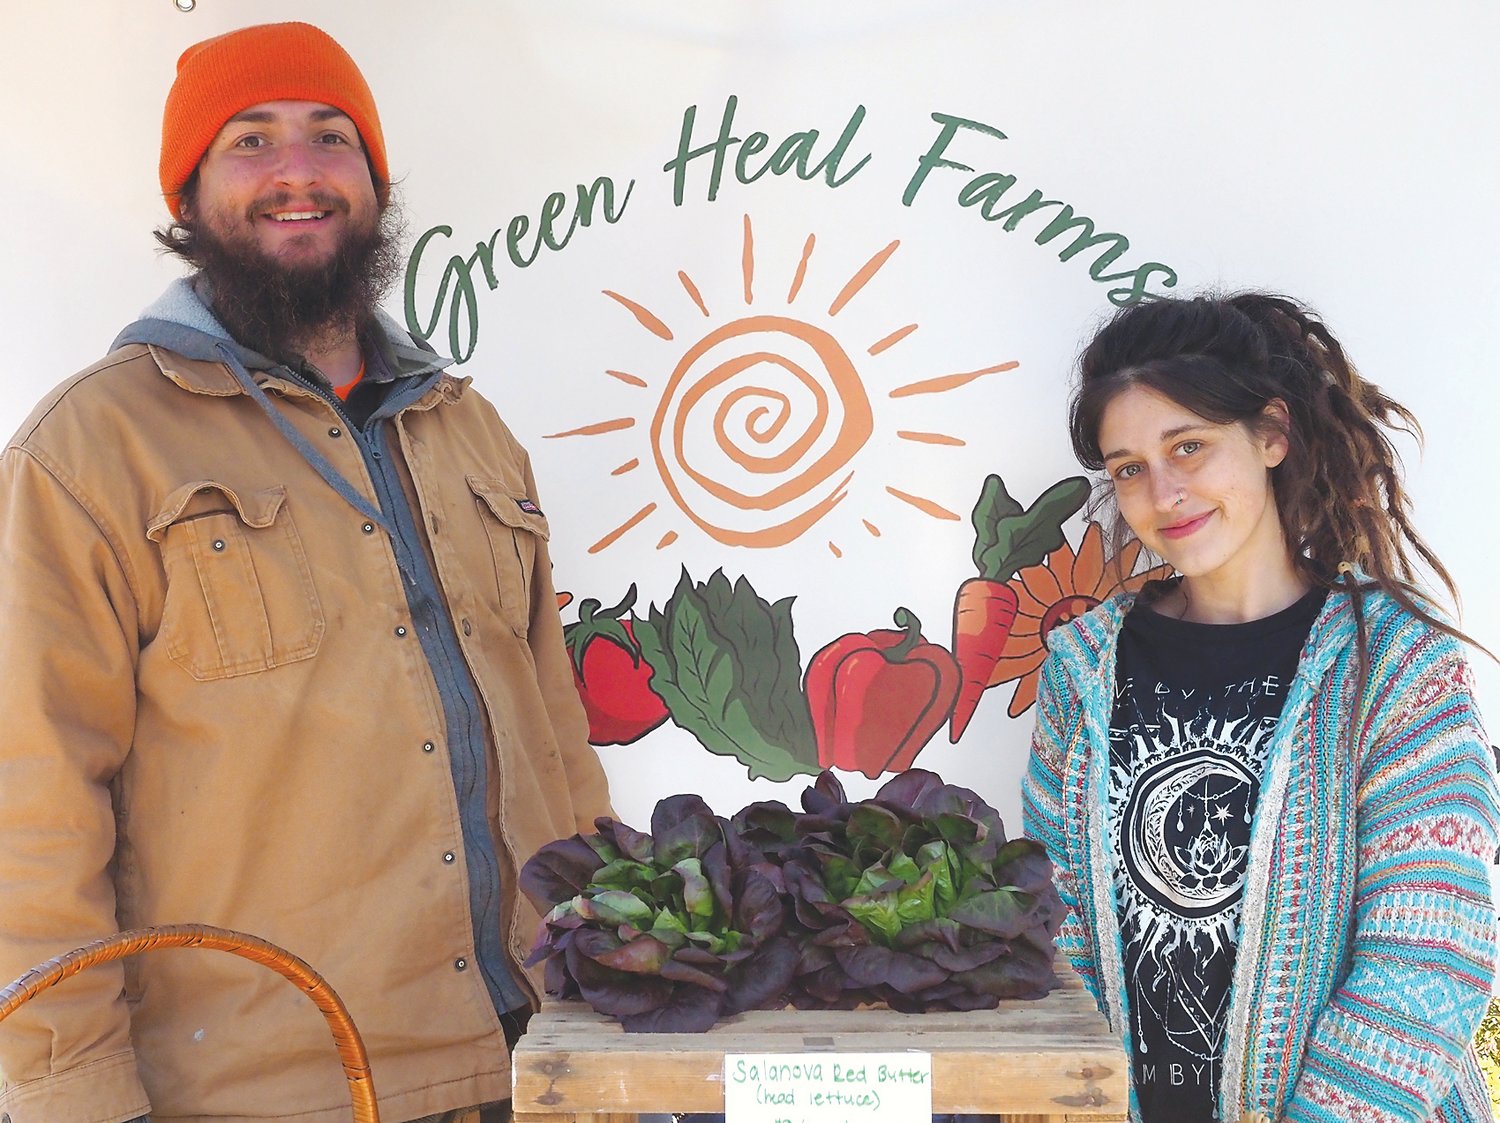 Proprietors Kenny and Courtney Boodman of Green Heal Farms grow local organic vegetables and cut flowers on their farm in Snow Camp. This sampling includes butter head lettuce, Swiss chard and other early spring greens.